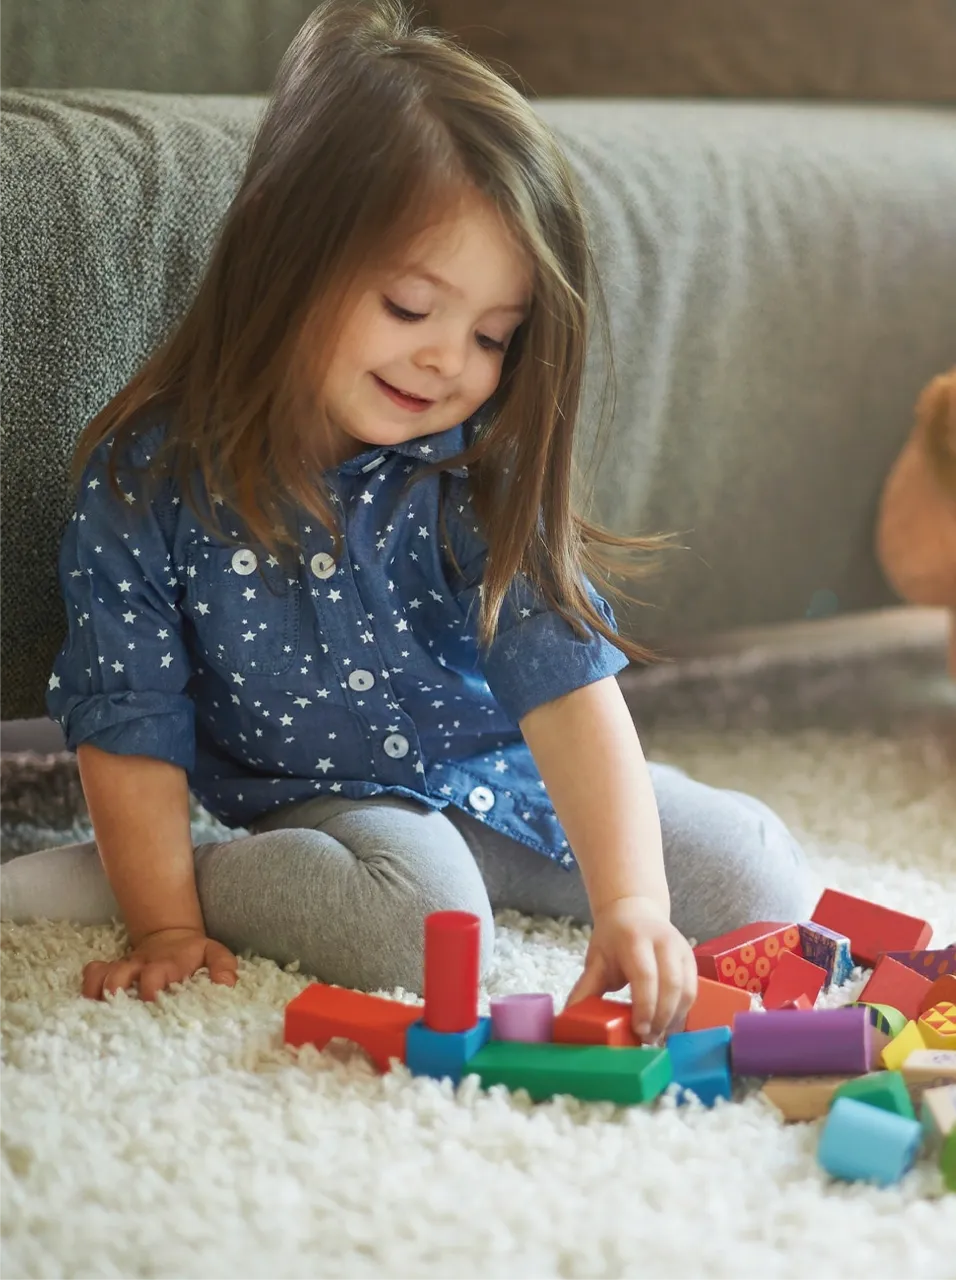 A child playing toy blocks